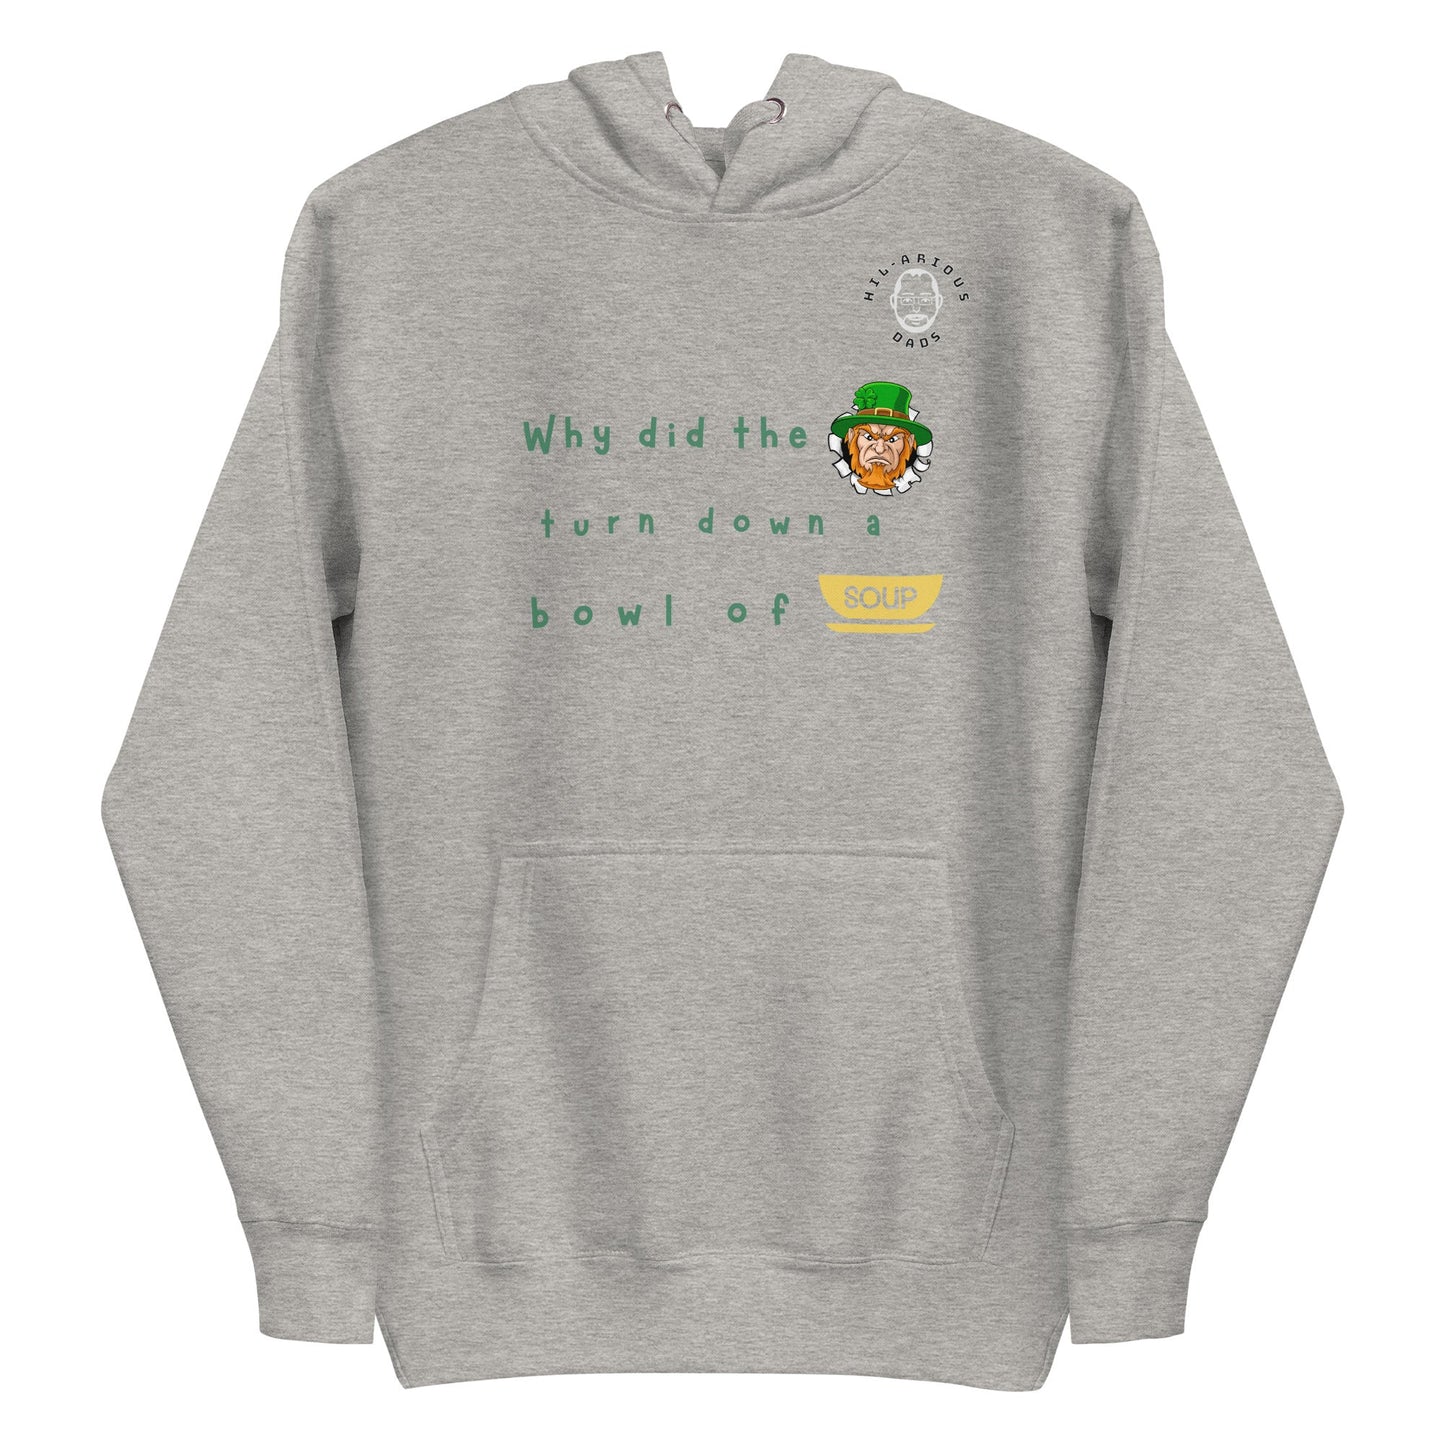 Why did the leprechaun turn down a bowl of soup?-Hoodie - Hil-arious Dads